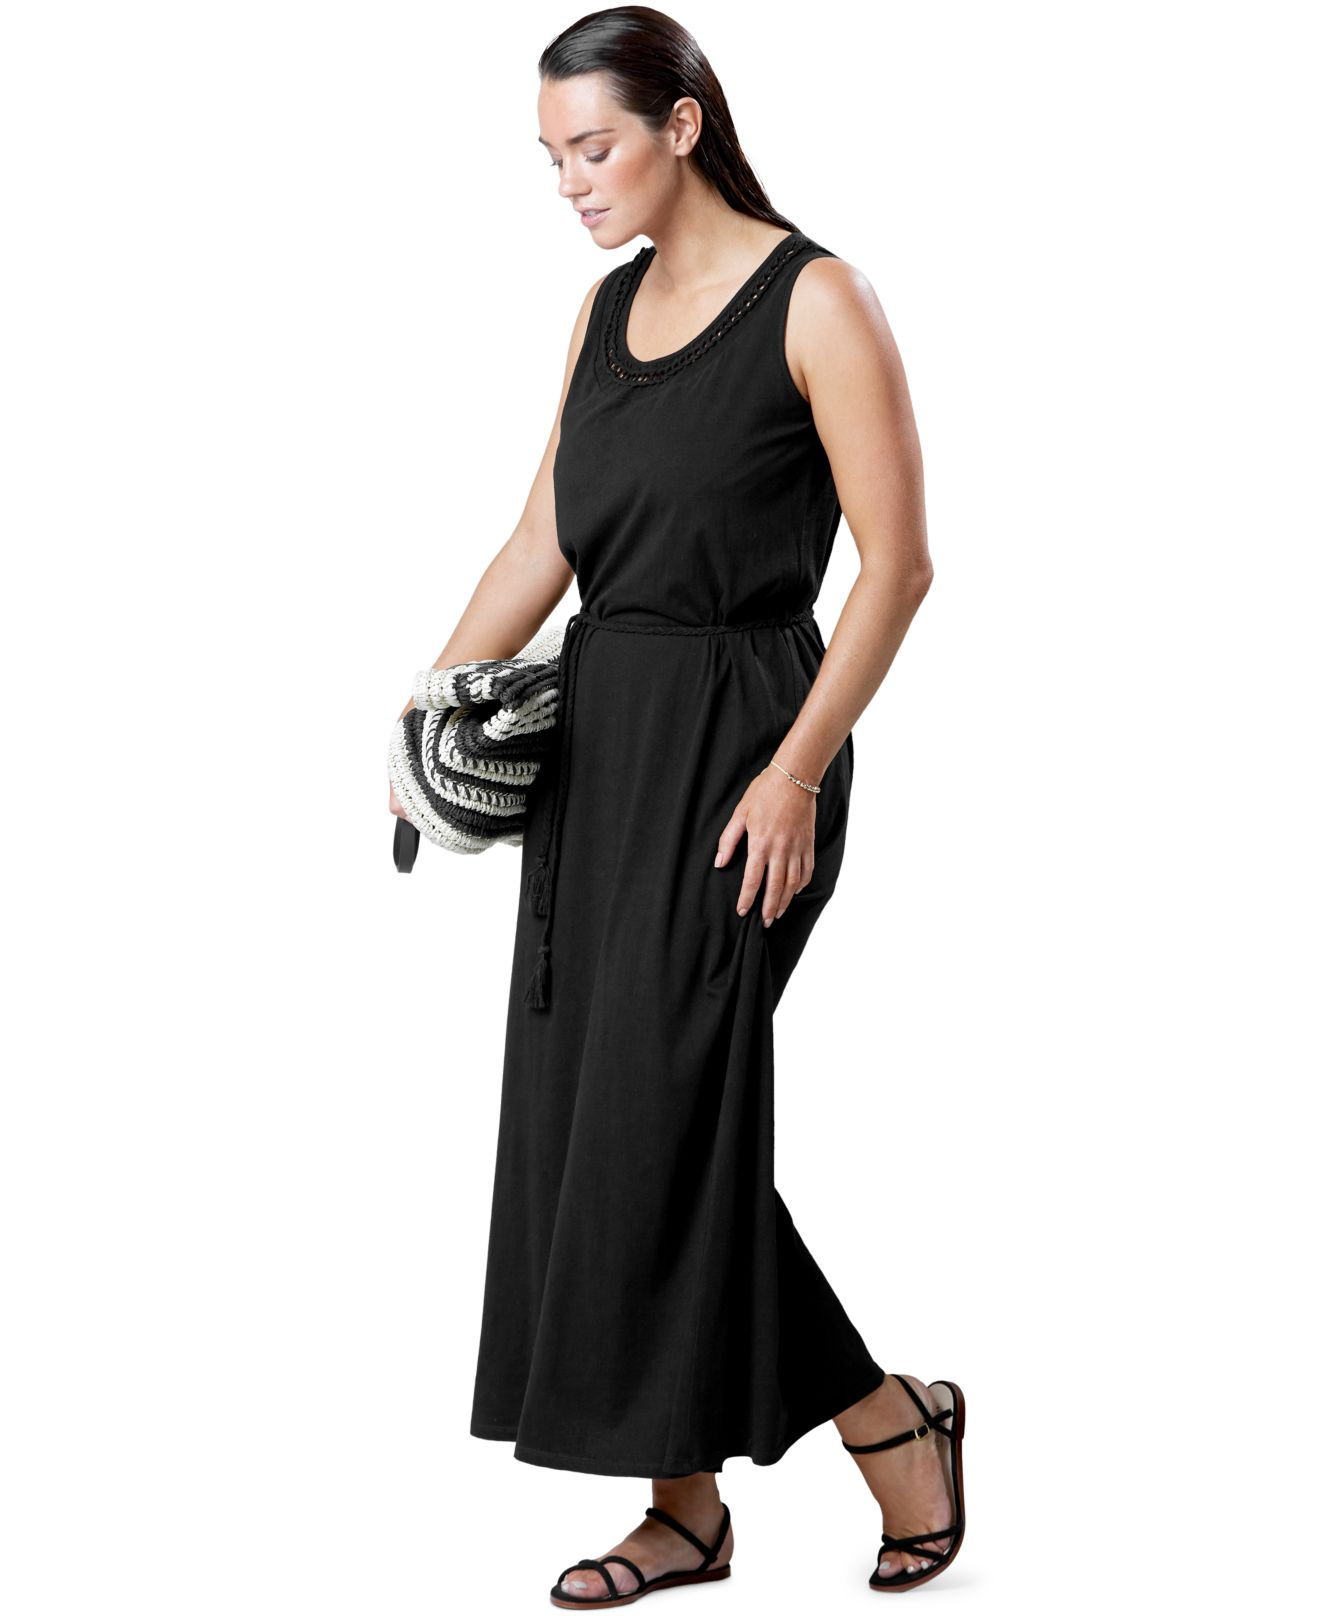 Lyst - Violeta By Mango Plus Size Sleeveless Belted Maxi Dress in Black